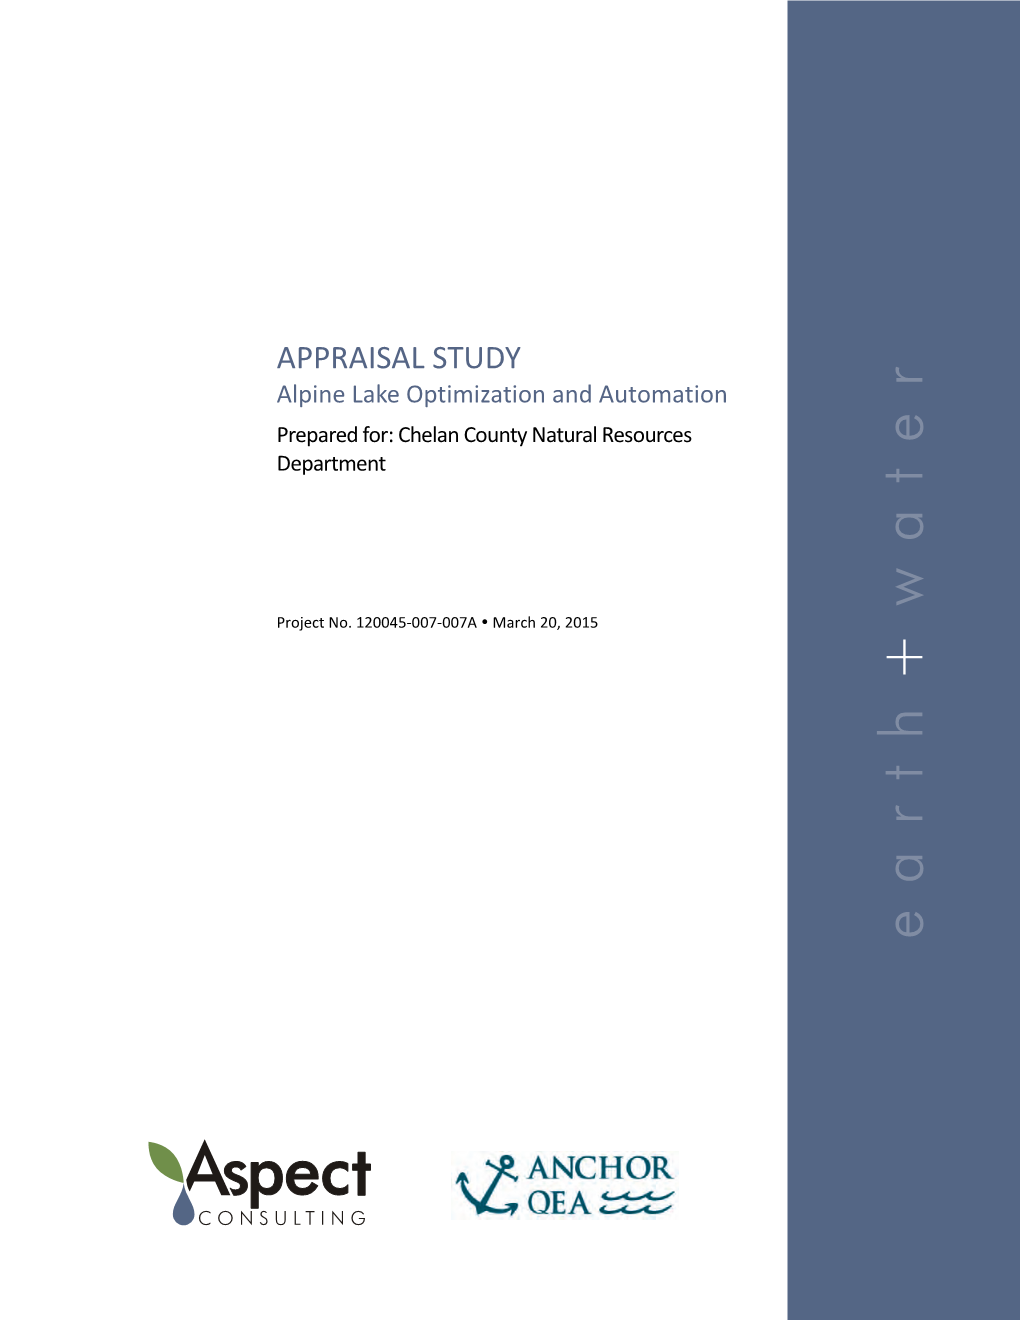 APPRAISAL STUDY Alpine Lake Optimization and Automation Prepared For: Chelan County Natural Resources Department